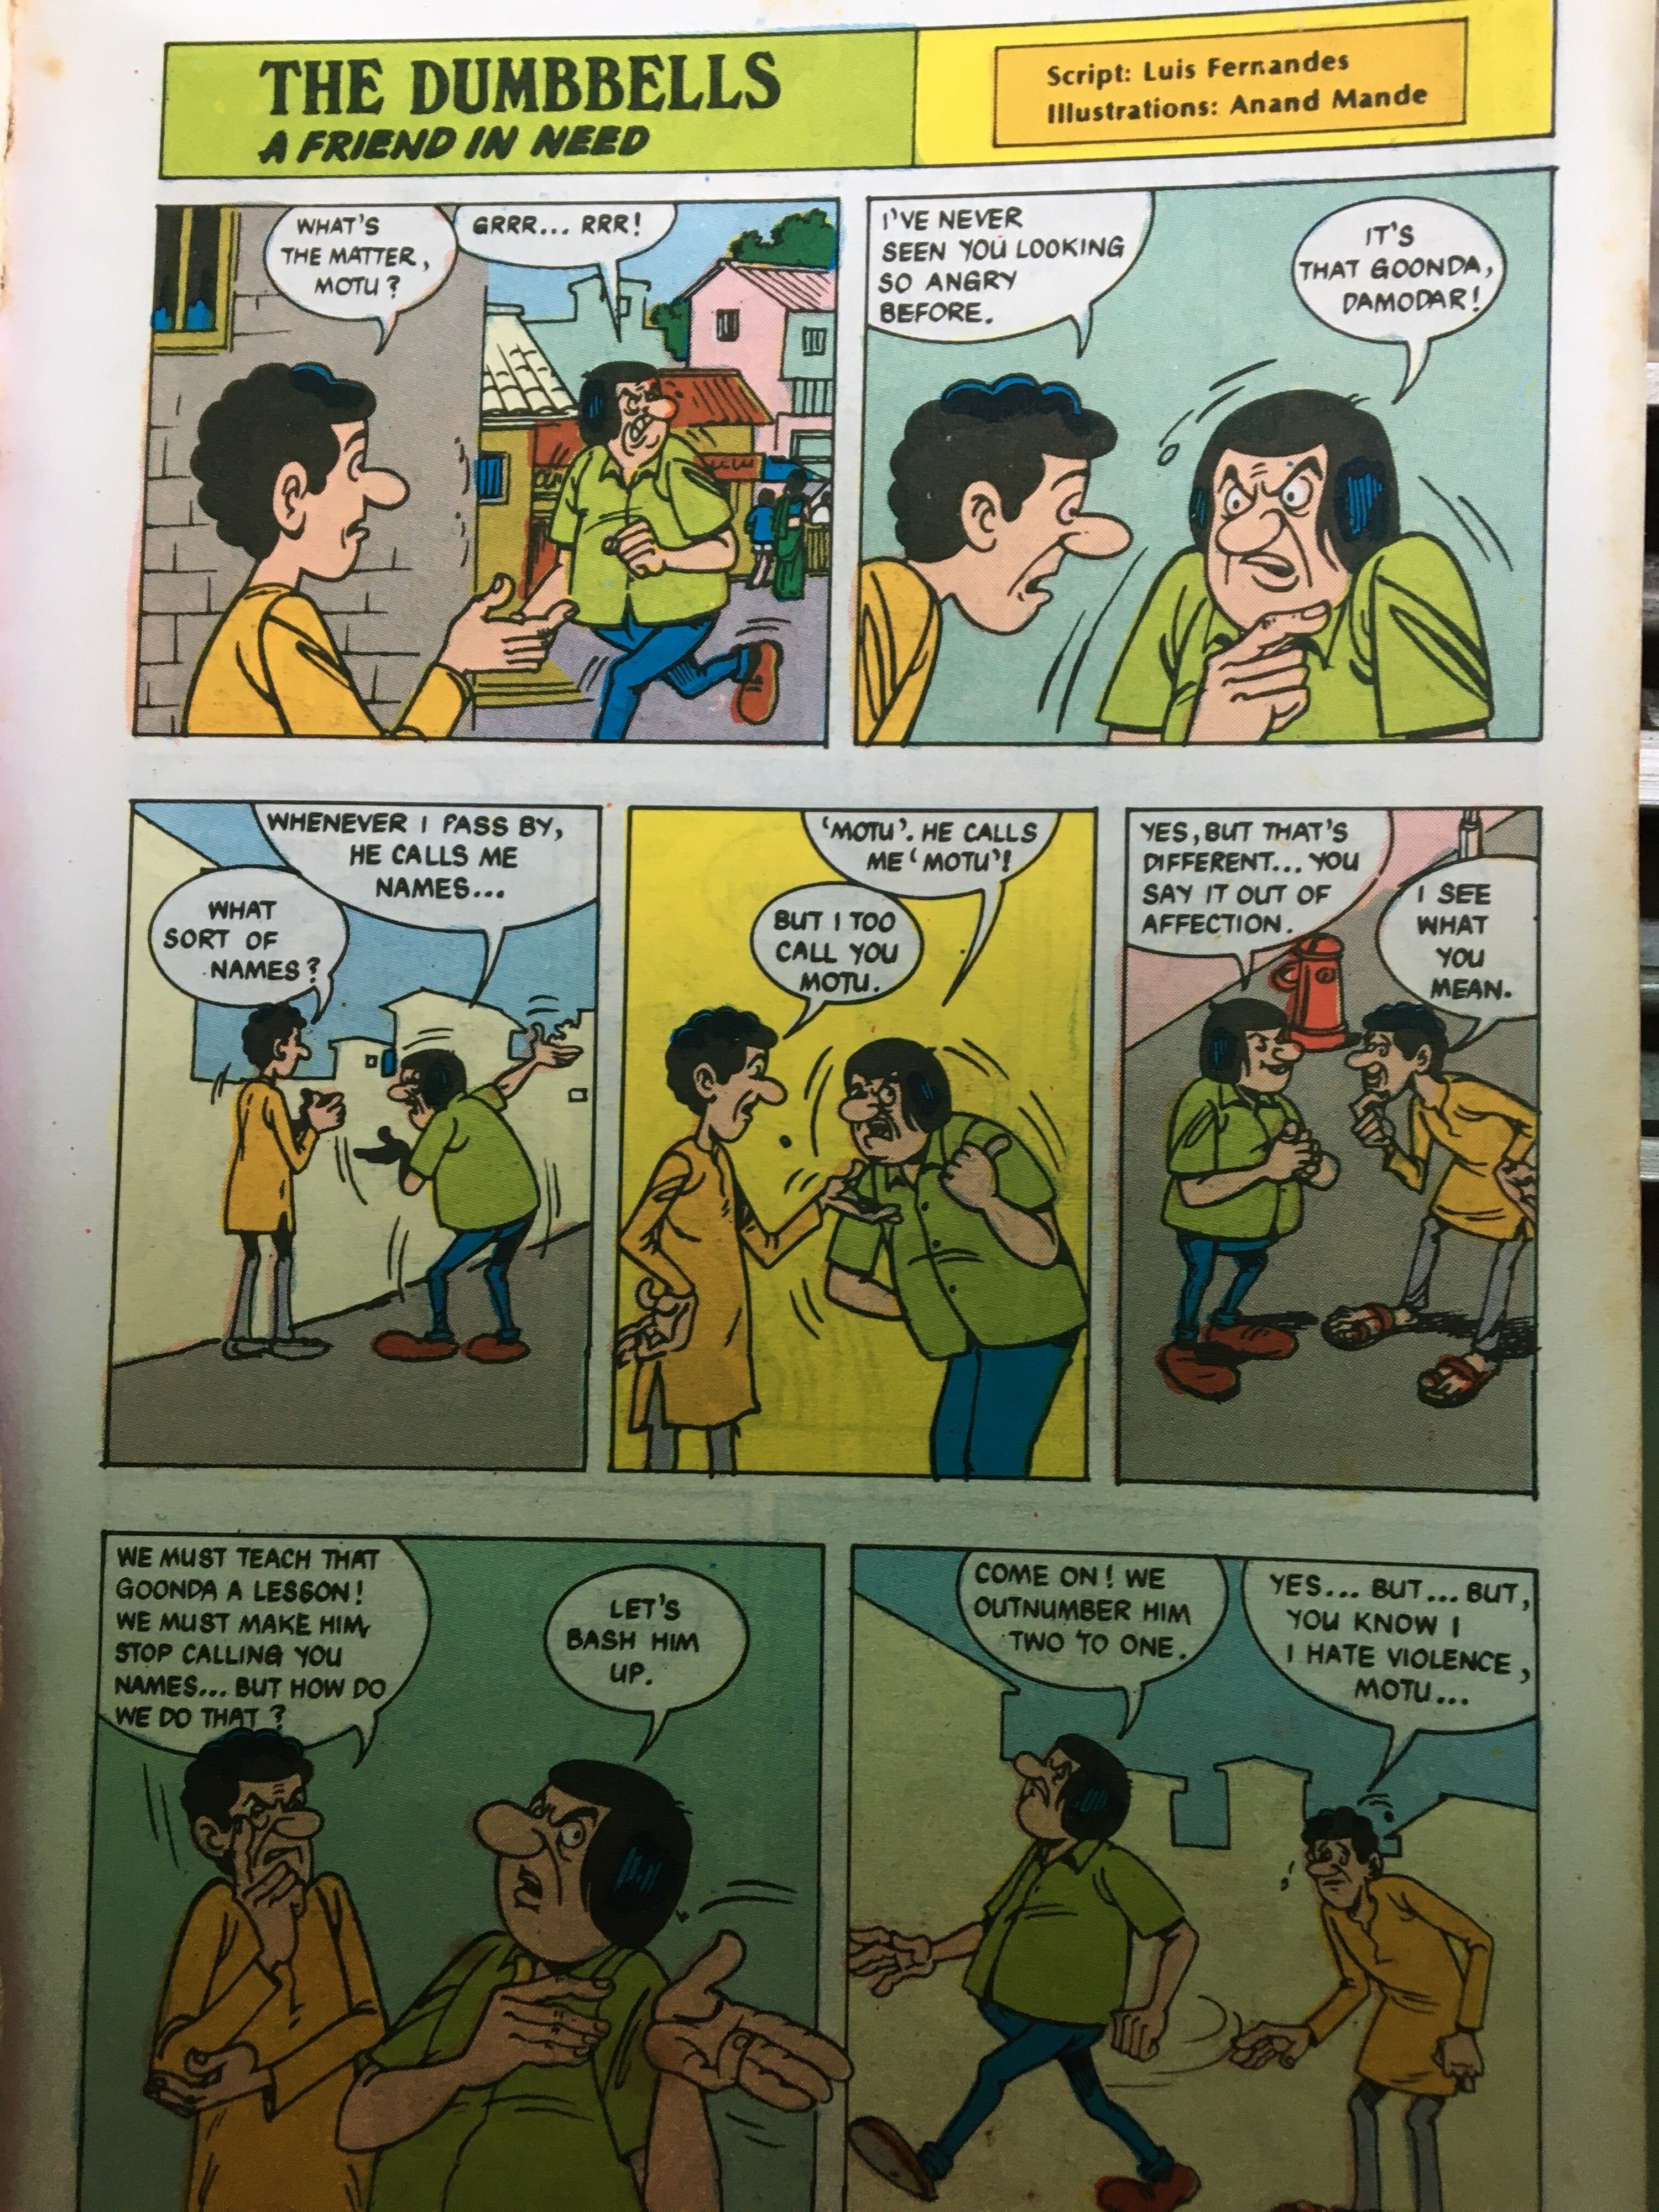 whend did tinkle comics start